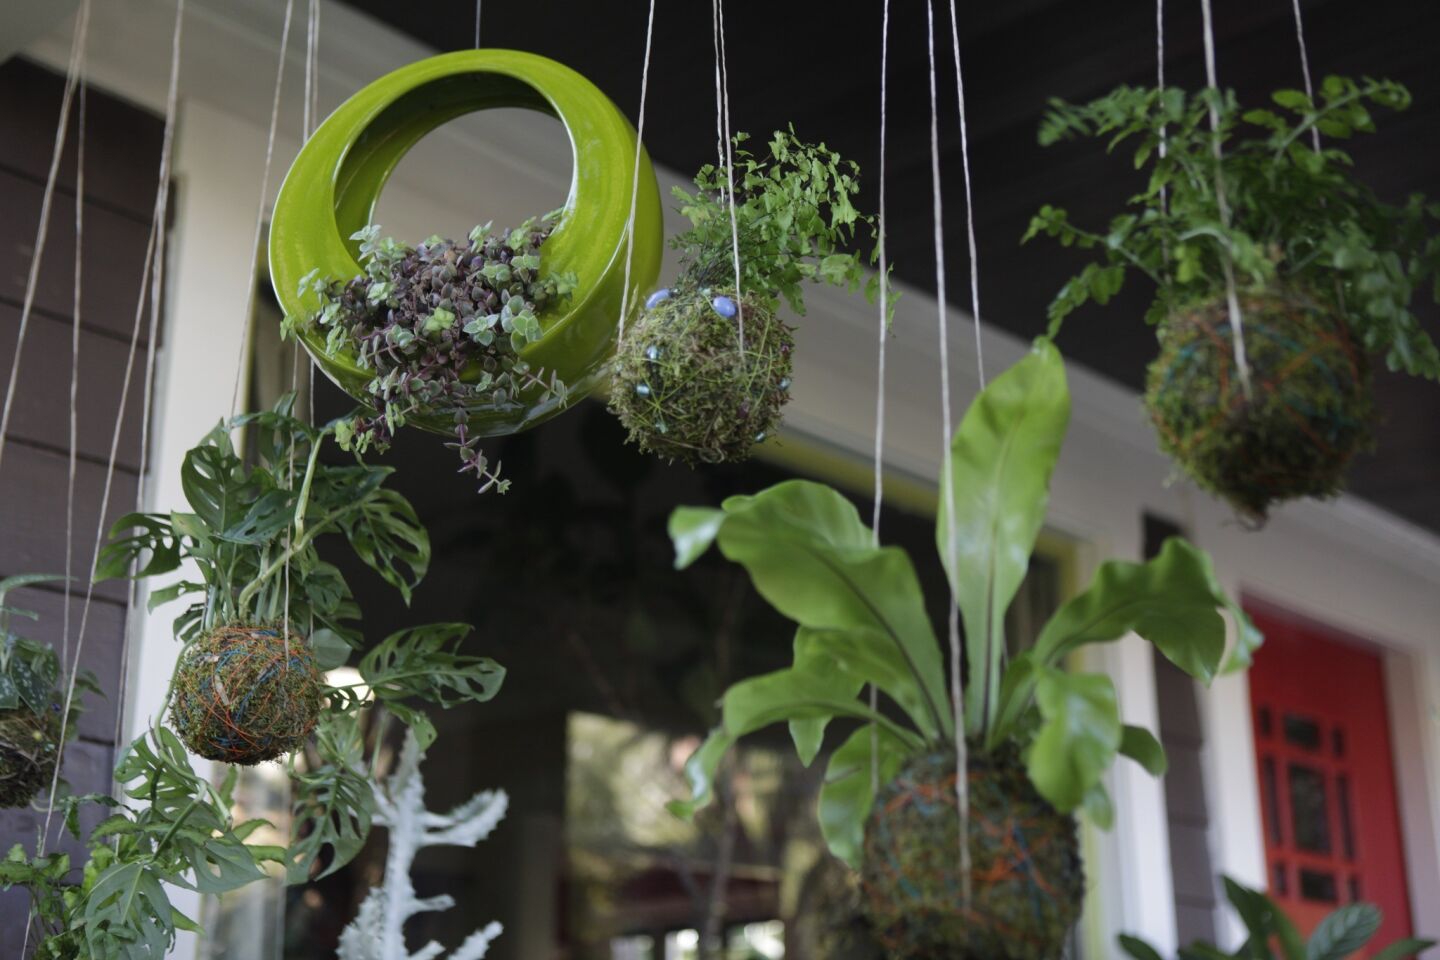 The hanging plants are ferns and philodendrons planted in sphagnum moss, bonsai mix and peat moss. Gutierrez wraps them with colorful twine, adds beaded accents and hangs them from the ceiling with twine-covered wire from a craft store. To keep them from drying out, she submerges them in a bowl of water.